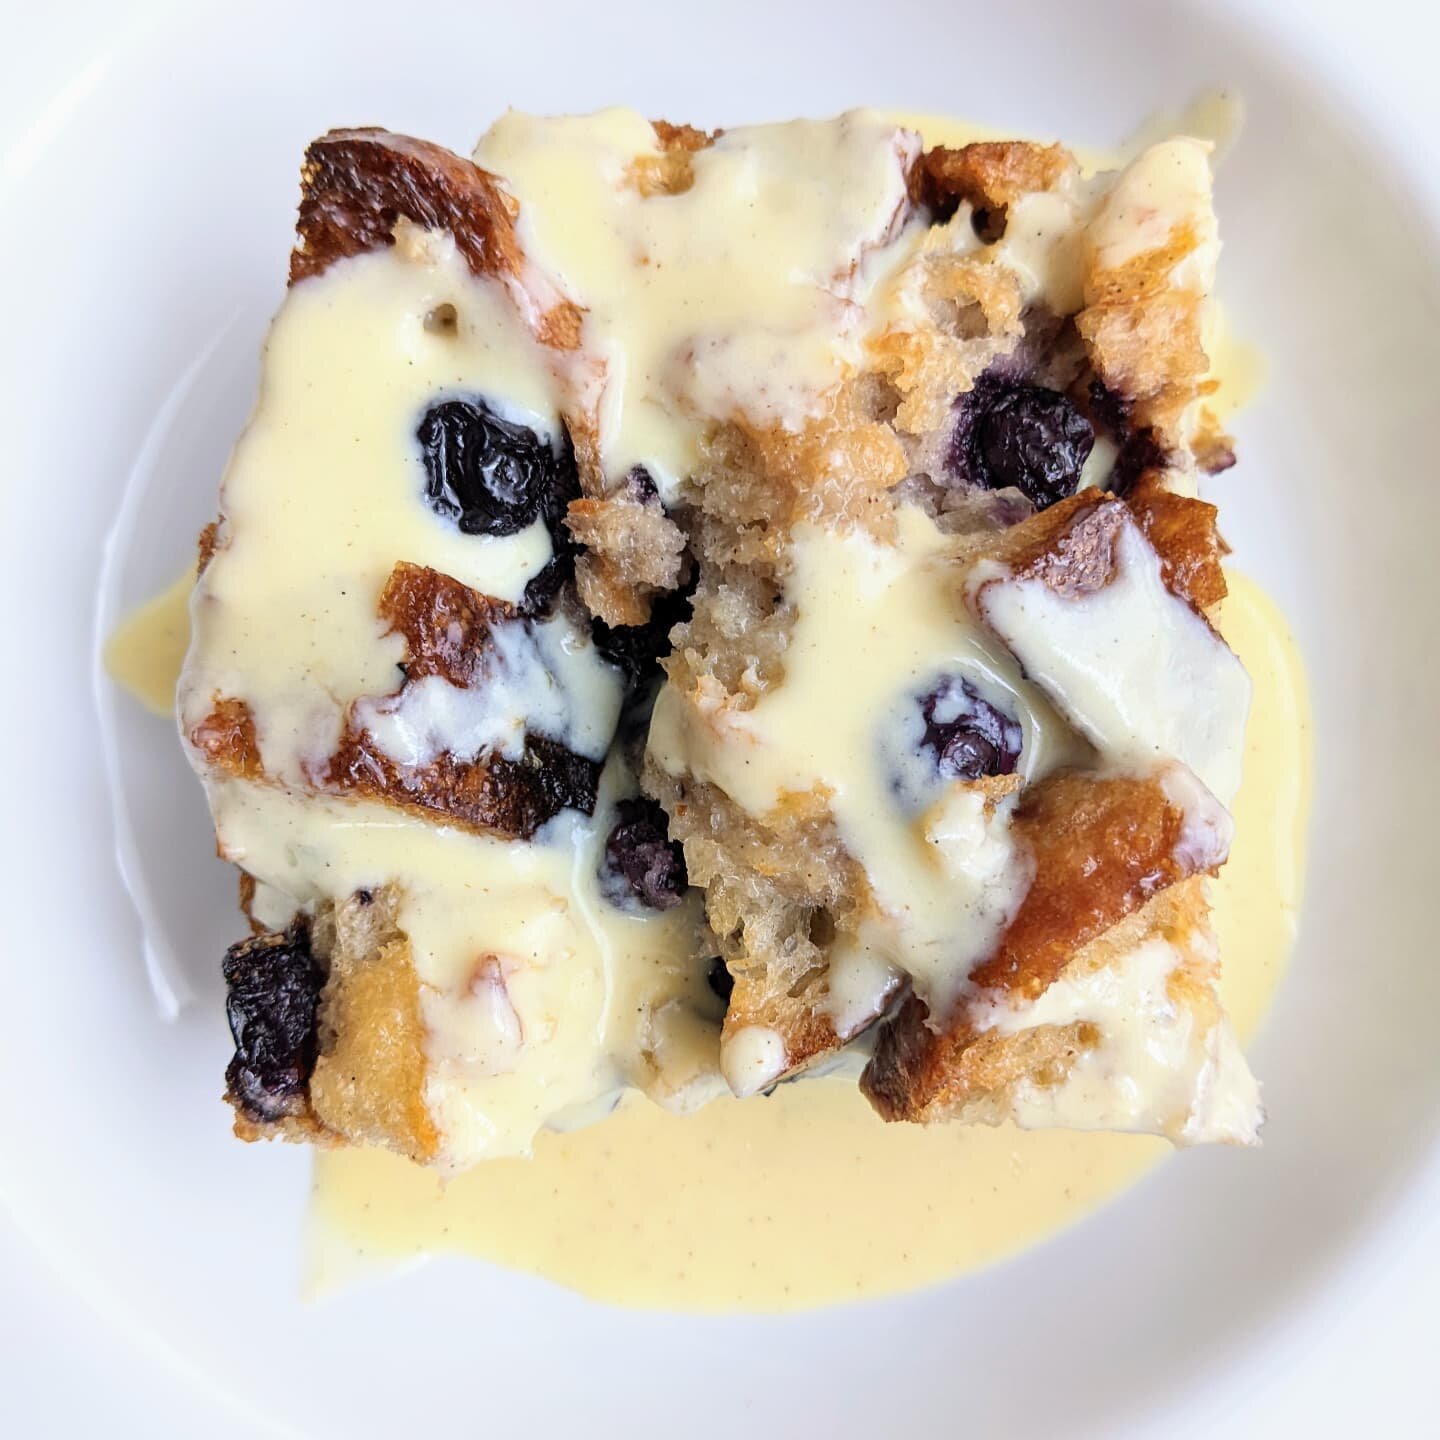 Made some blueberry bread pudding with creme anglaise.  Heaven! 

#circlesaregood #artist #create #creative  #elizabethanderson #inthemoment #baking #inthekitchen #goodness #bakinglove #blueberry #breadpudding #cremeanglaise #delicious